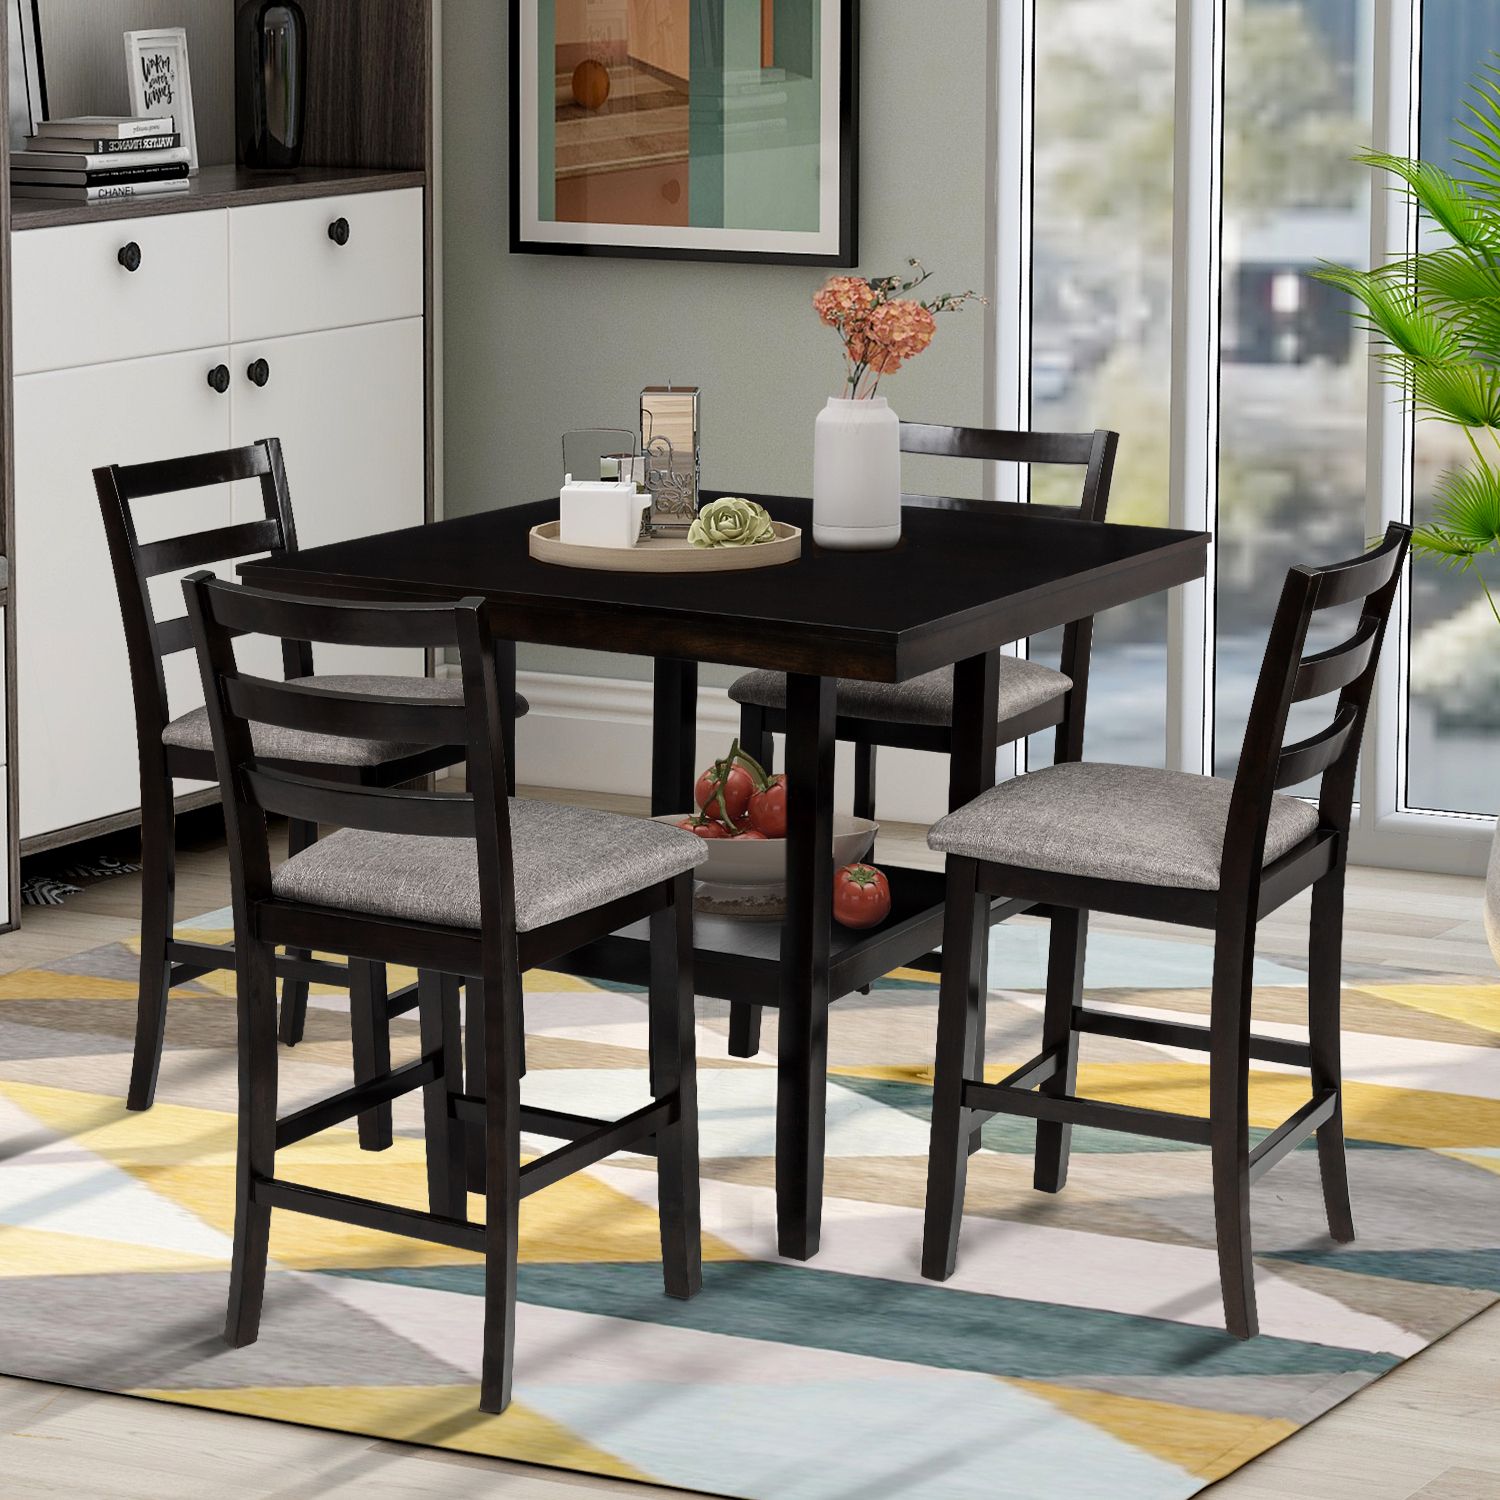 Most Recent Euroco 5 Piece Counter Height Dining Set, Wooden Dining Set With Padded Throughout Wood Bistro Table And Chairs Sets (View 7 of 15)